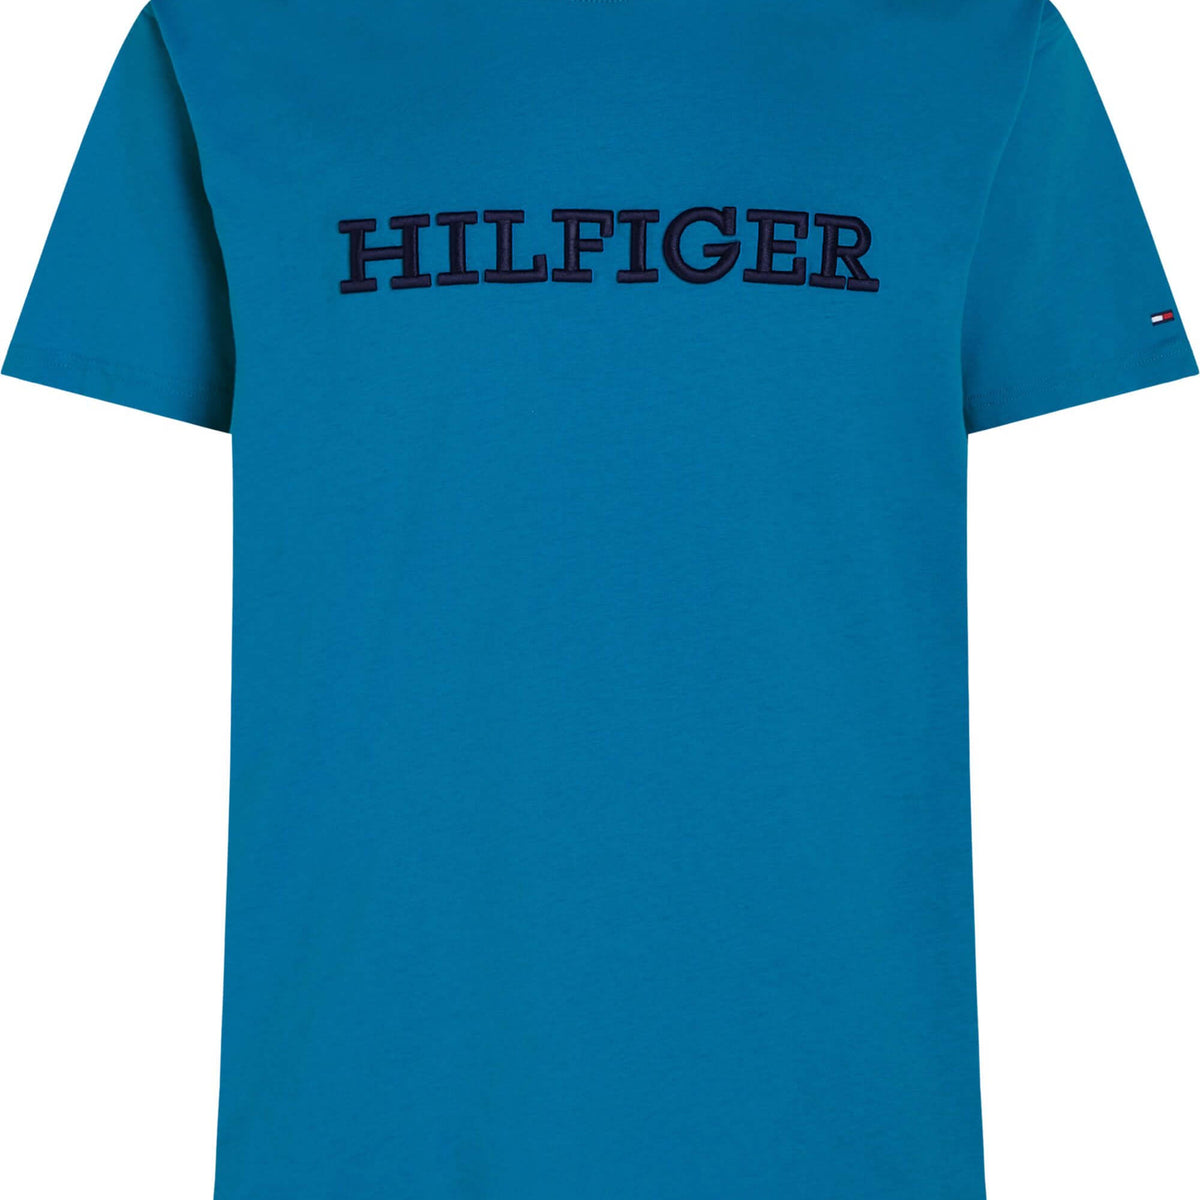 Tommy Hilfiger T-Shirt Aqua Embroidered Monotype